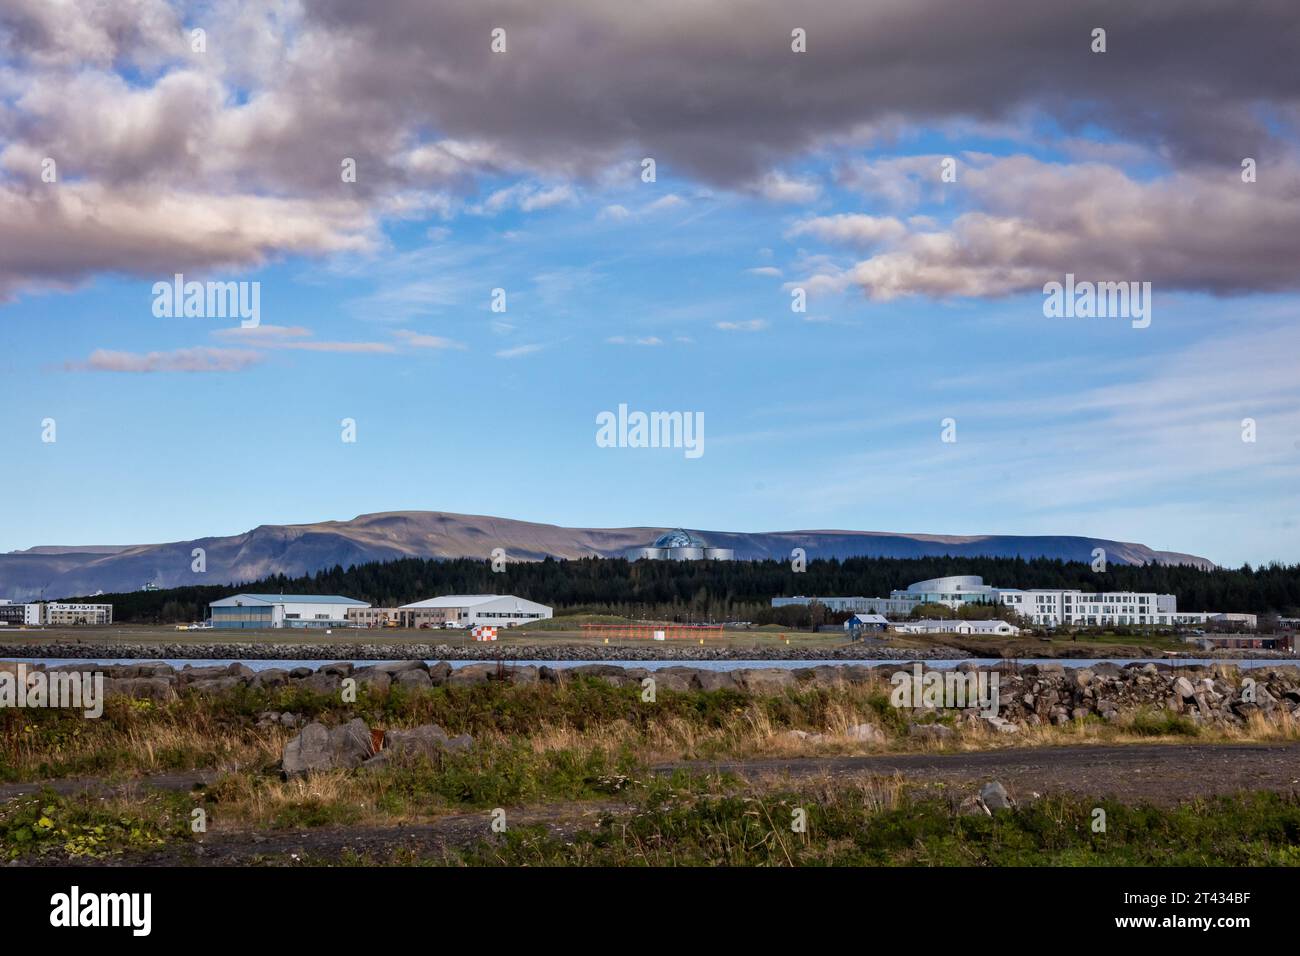 Reykjavik, Iceland - September 25, 2023: Landscape with Reykjavik domestic airport and Perlan building, mountains in background. Stock Photo